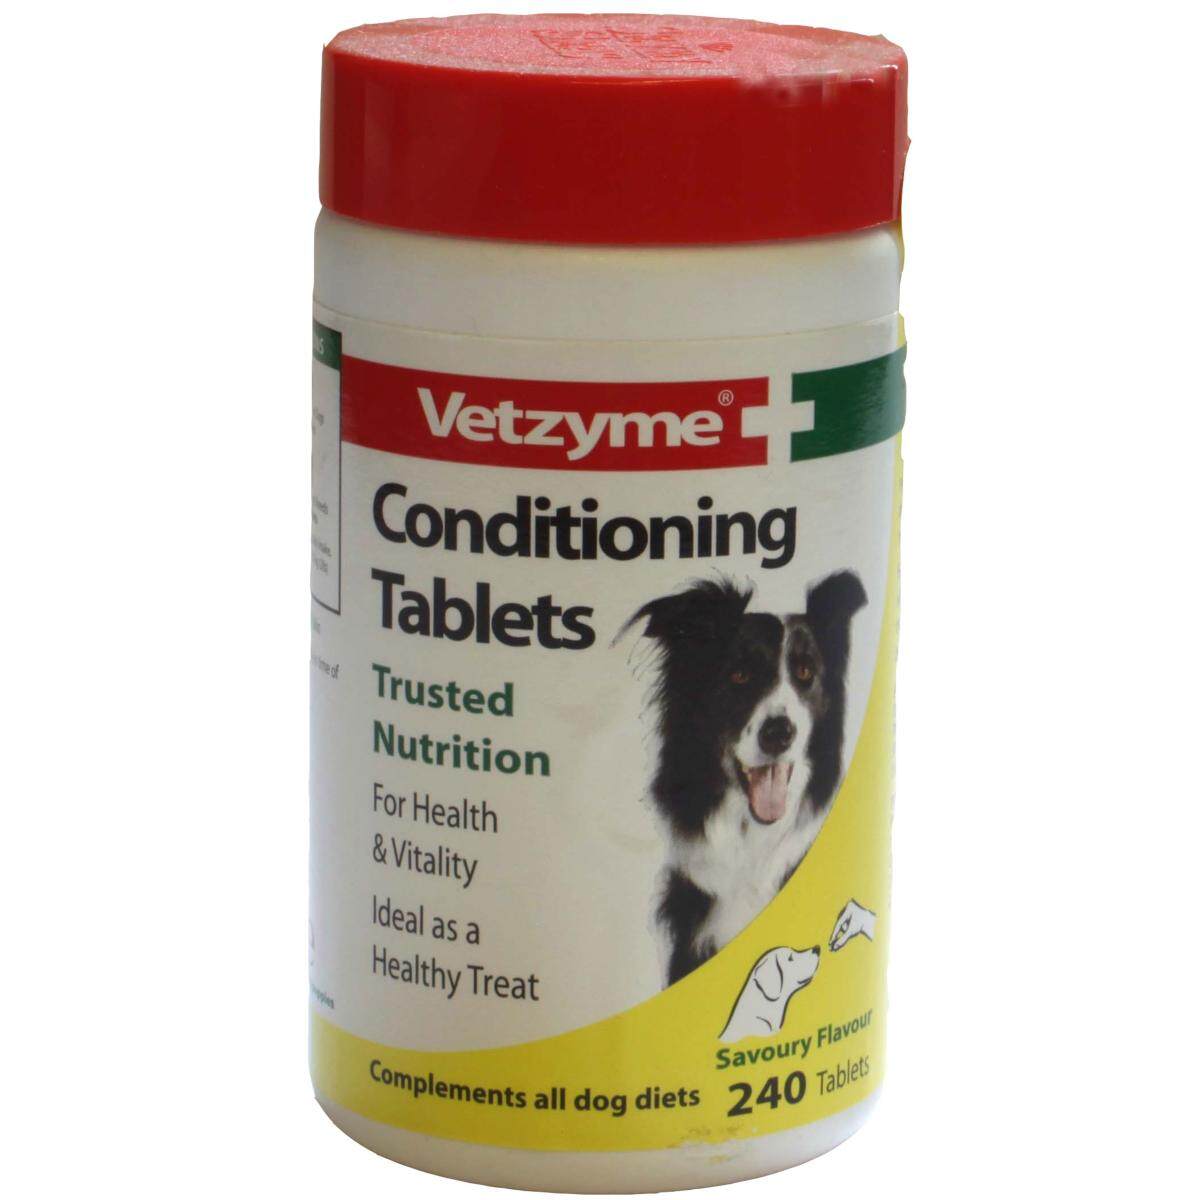 Vetzyme Conditioning Tablets with B Complex Vitamins for Dog (120, 240 and 500 tablets) dog vitamins good health appetite energetic energy active improve immune system shiny heathy coat and skin